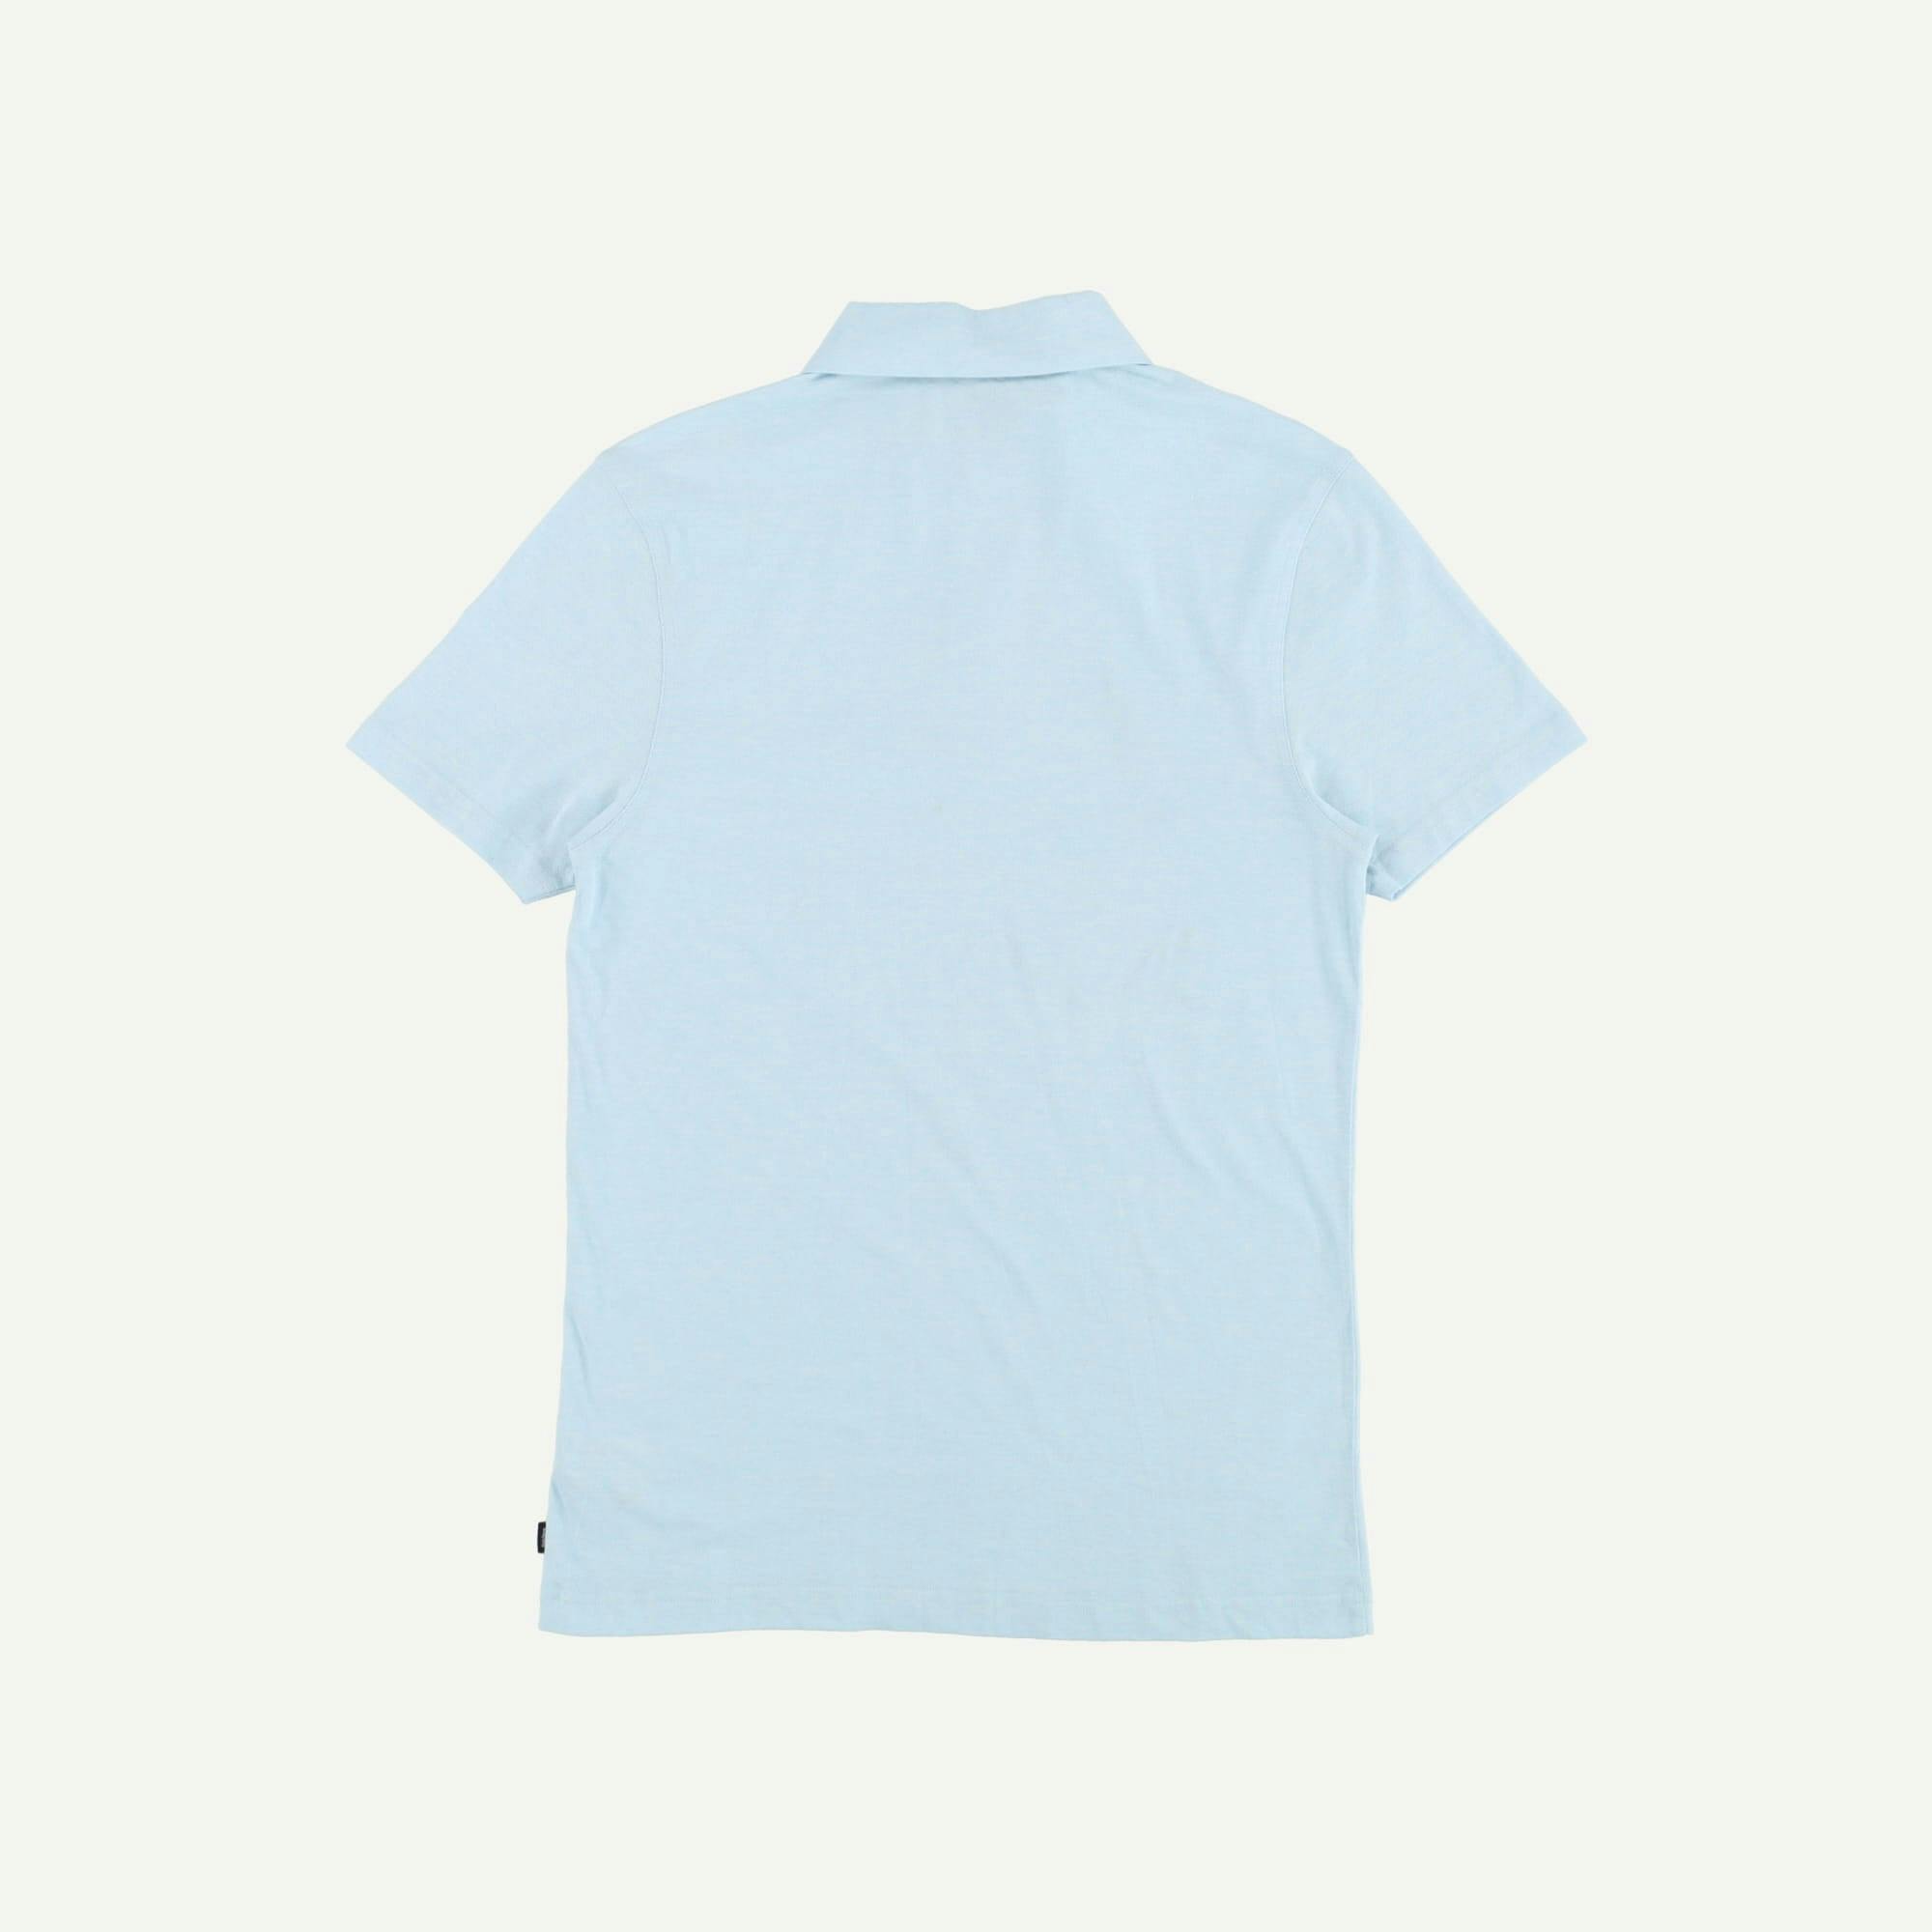 Finisterre As new Blue Polo Shirt